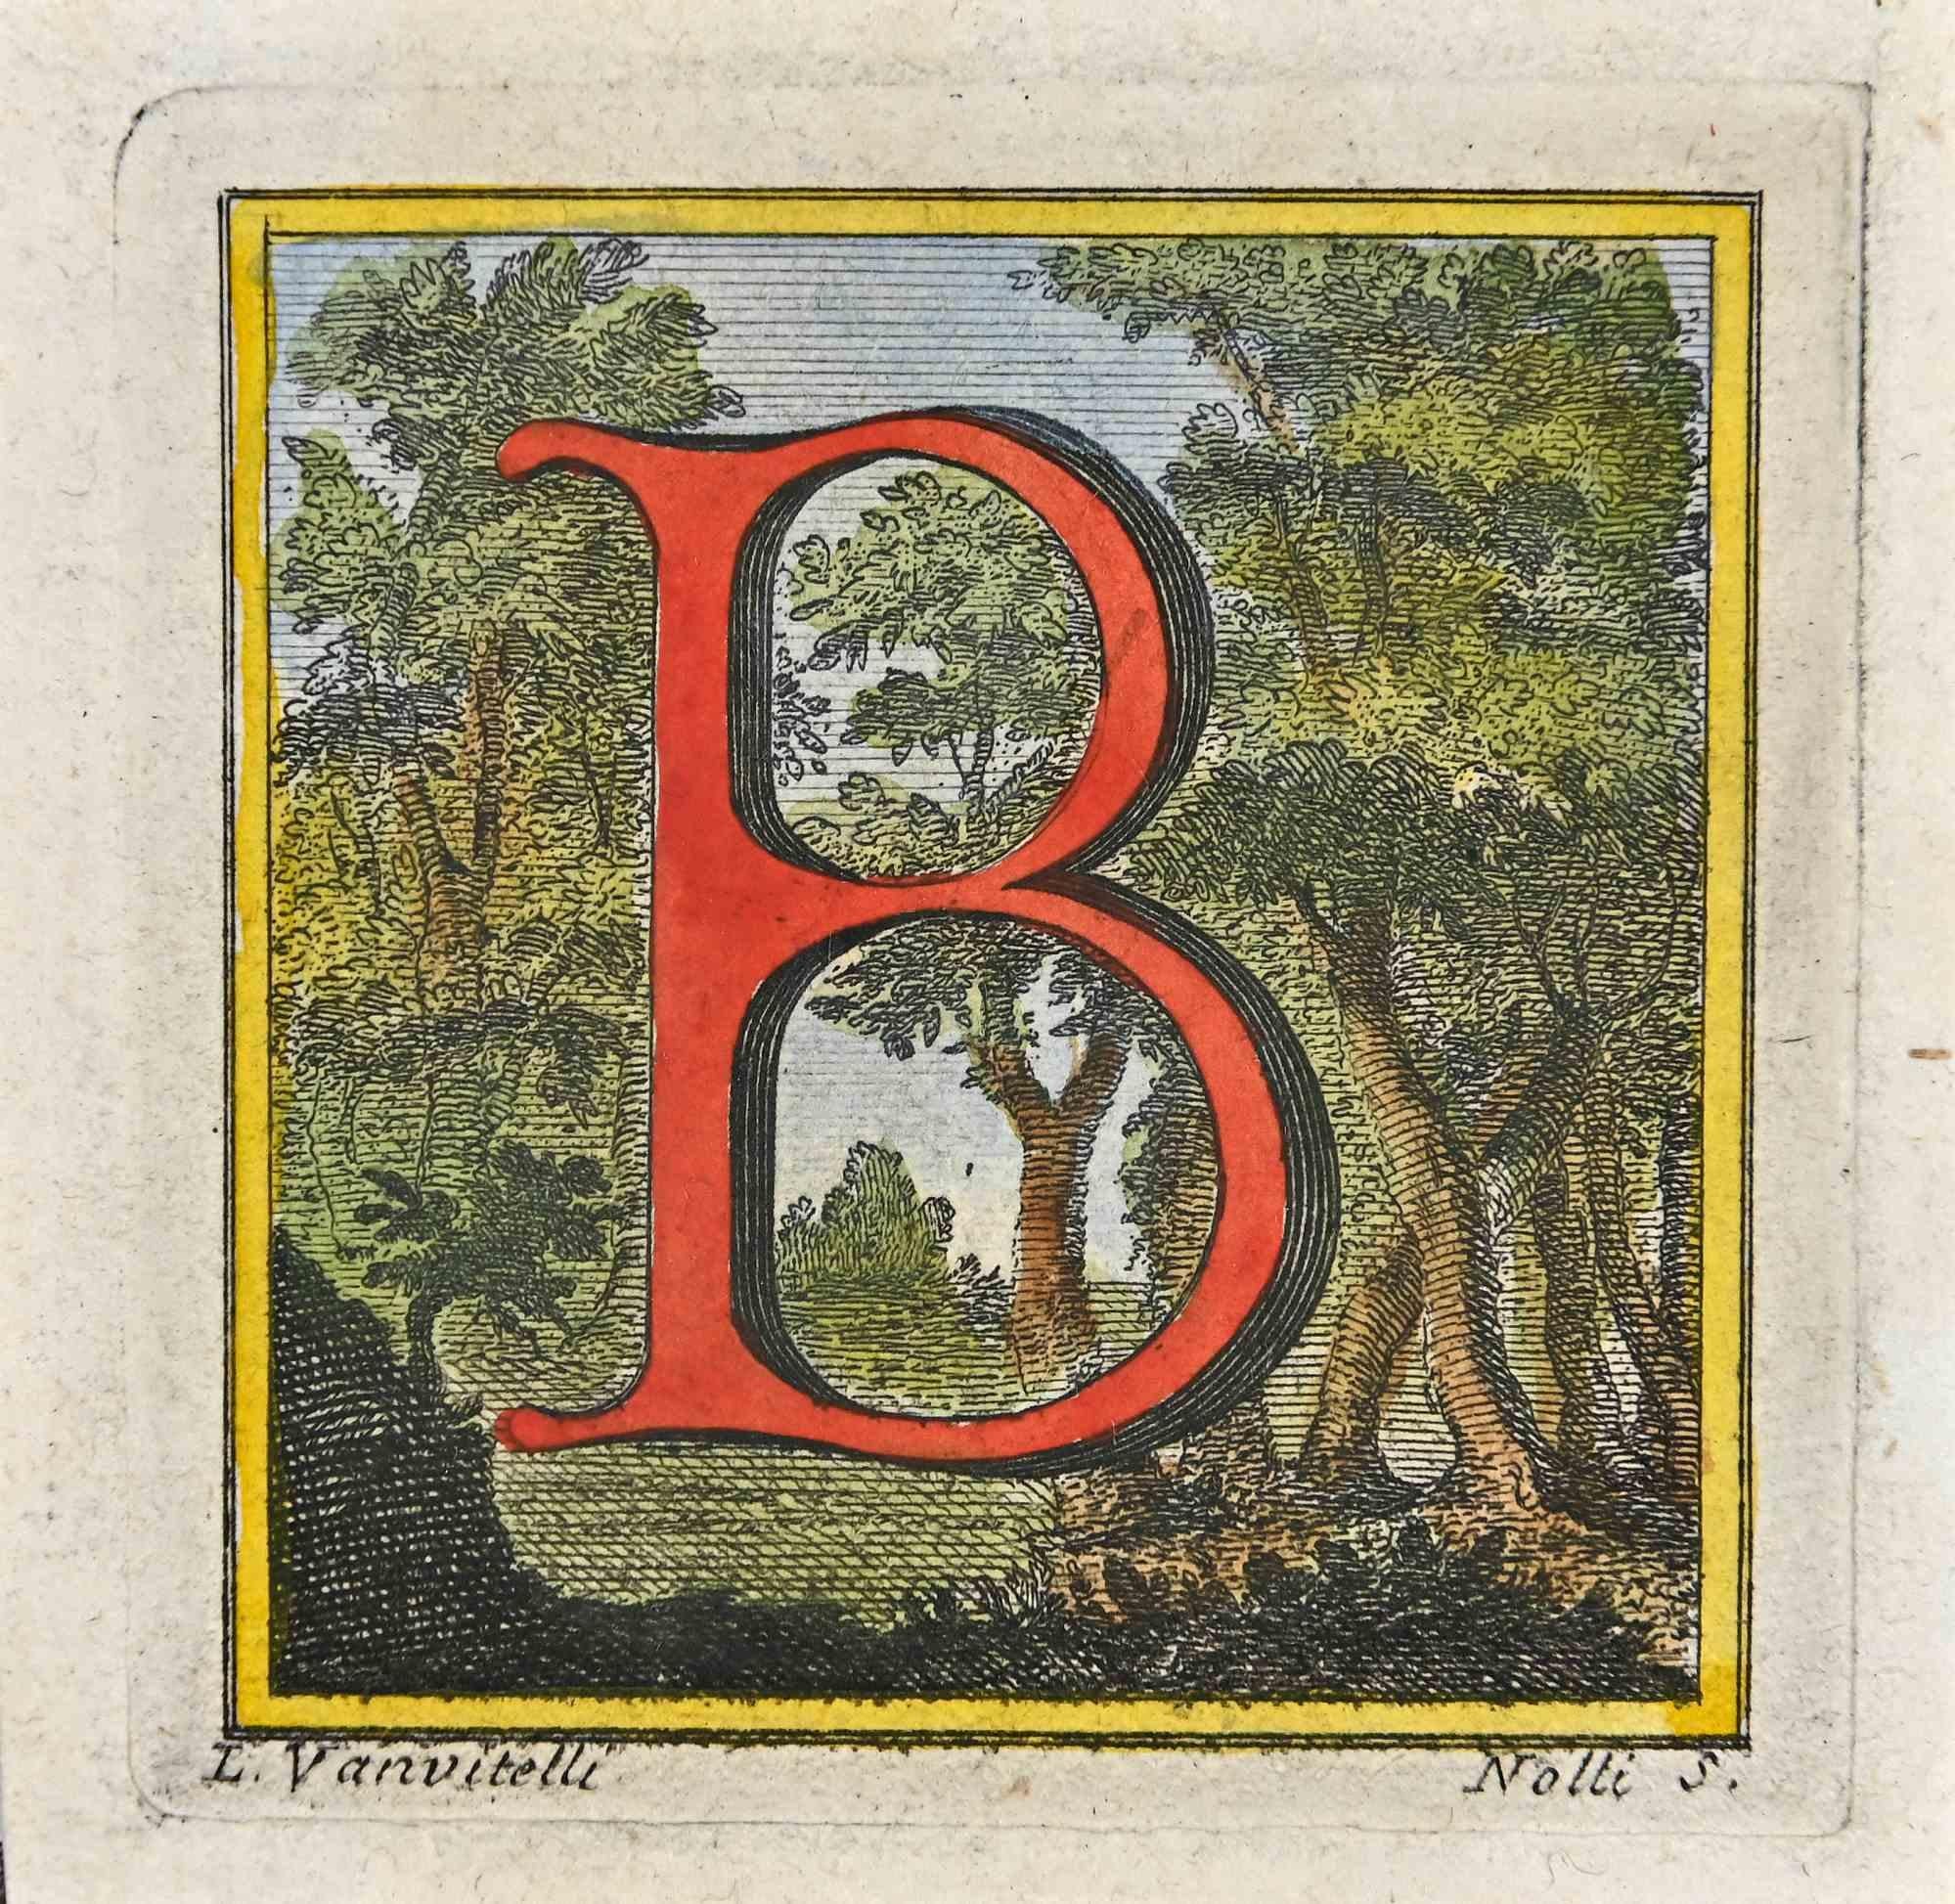 Letter of the Alphabet B,  from the series "Antiquities of Herculaneum", is an etching on paper realized by Luigi Vanvitelli in the 18th century.

Signed on the plate.

Good conditions.

The etching belongs to the print suite “Antiquities of